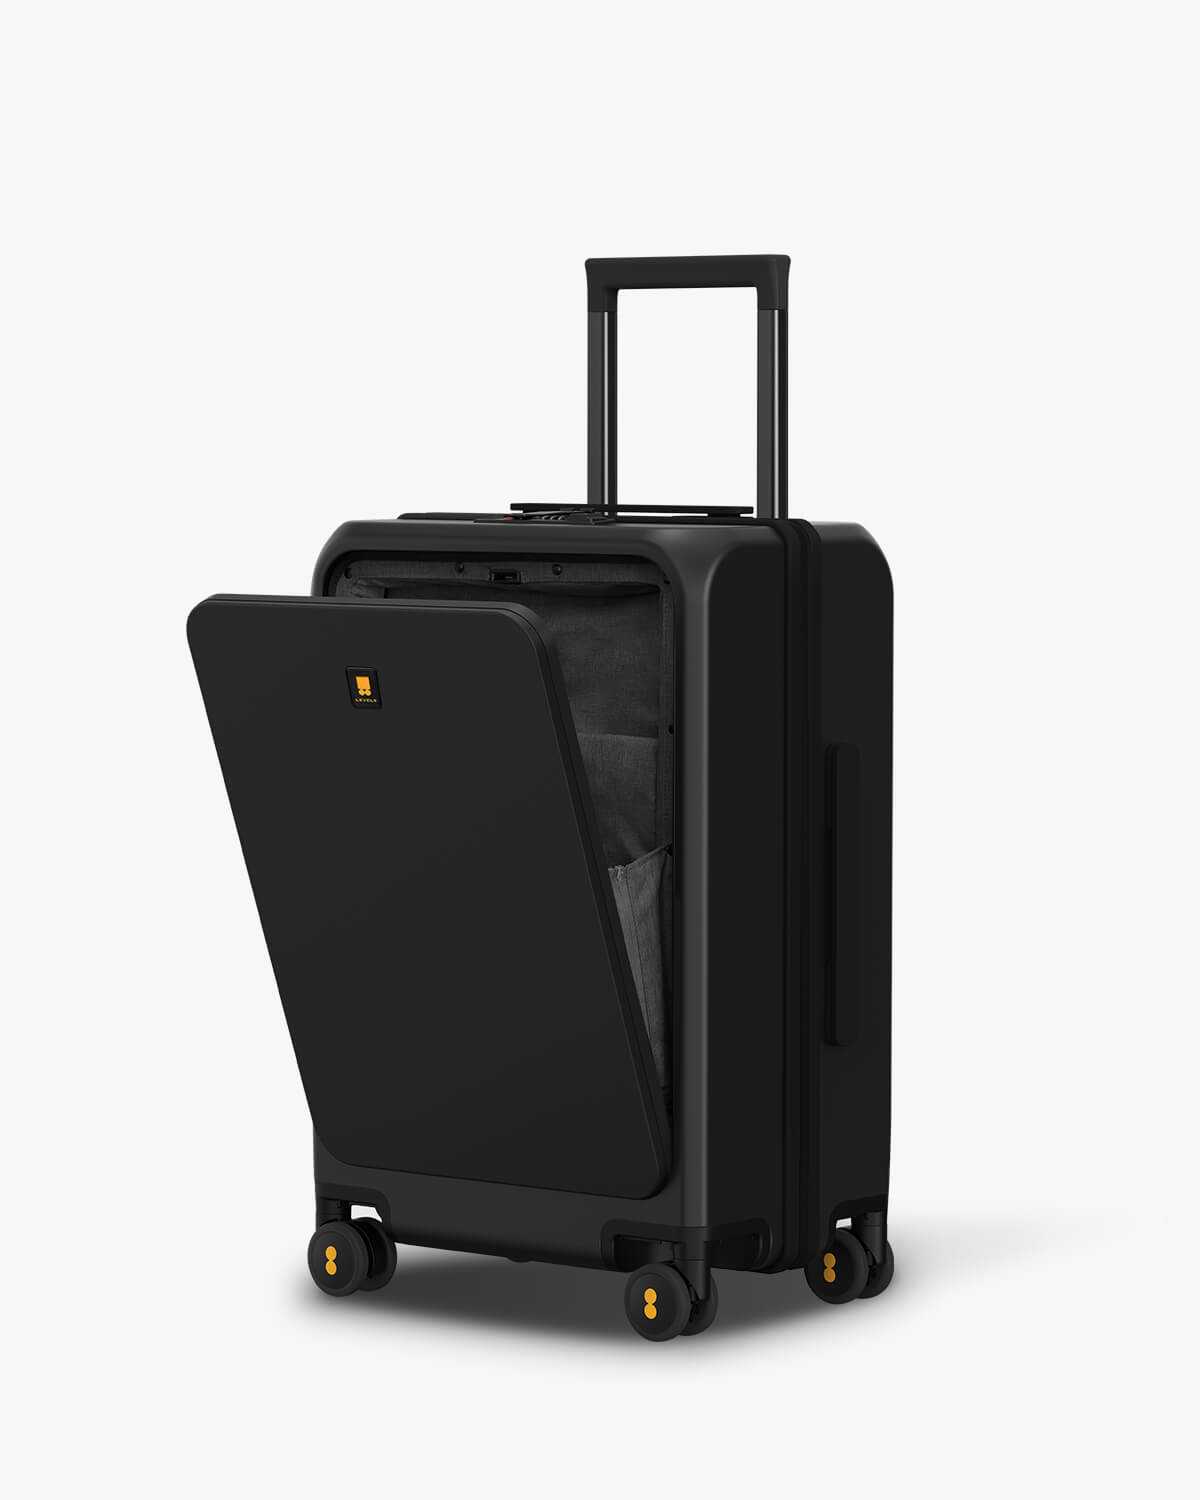 LEVEL8 Road Runner Pro Carry-On With Laptop Pocket